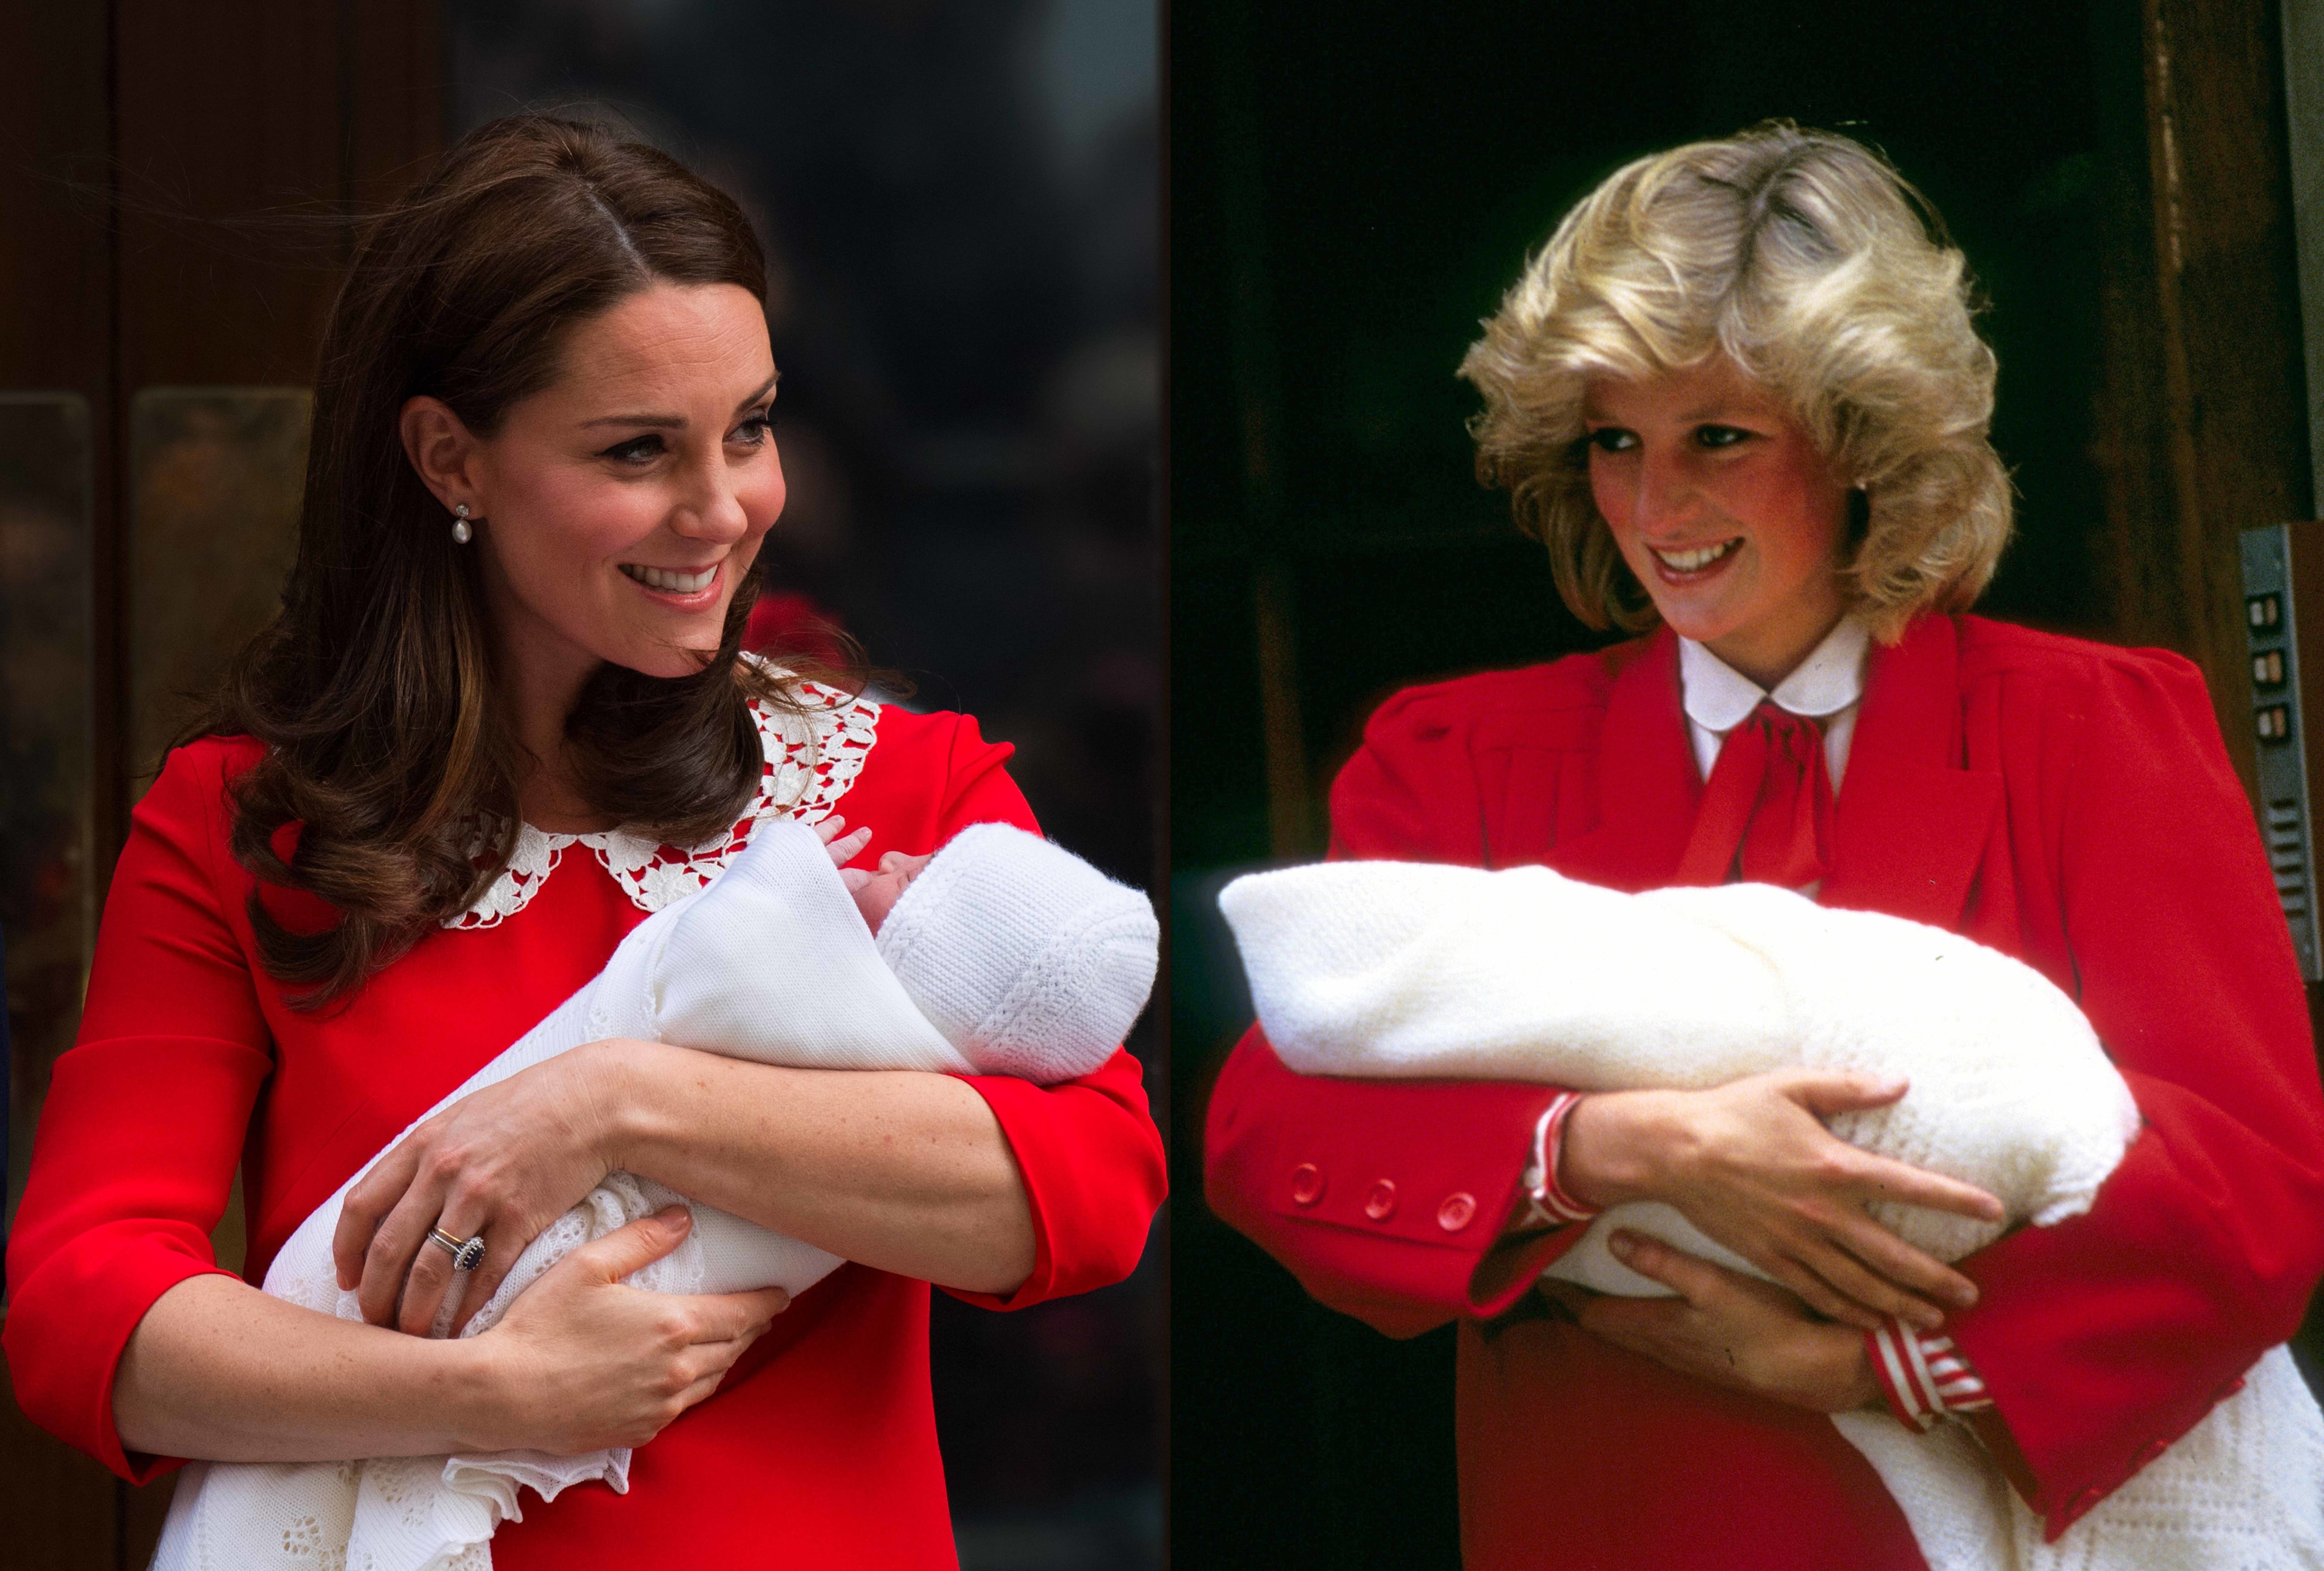 In this photo composite a comparison has been made between Catherine, Duchess of Cambridge carrying her newborn son and Diana, Princess of Wales carrying her newborn son Prince Harry (R) both leaving the Lindo Wing of St Mary's hospital. ***LEFT IMAGE*** Editorial # 950804602 LONDON, UNITED KINGDOM - APRIL 23: Catherine, Duchess of Cambridge carries her newborn son as she leaves the Lindo Wing of St Mary's hospital on April 23, 2018 in London, England. (Photo by Anwar Hussein/WireImage) RIGHT IMAGE*** Editorial # 909562840 LONDON, UNITED KINGDOM - SEPTEMBER 17: Diana, Princess of Wales leaves the Lindo Wing, St Mary's Hospital with baby Prince Harry on September 17, 1984 in London, England. (Photo by Anwar Hussein/Getty Images) (Anwar Hussein&amp;WireImage)